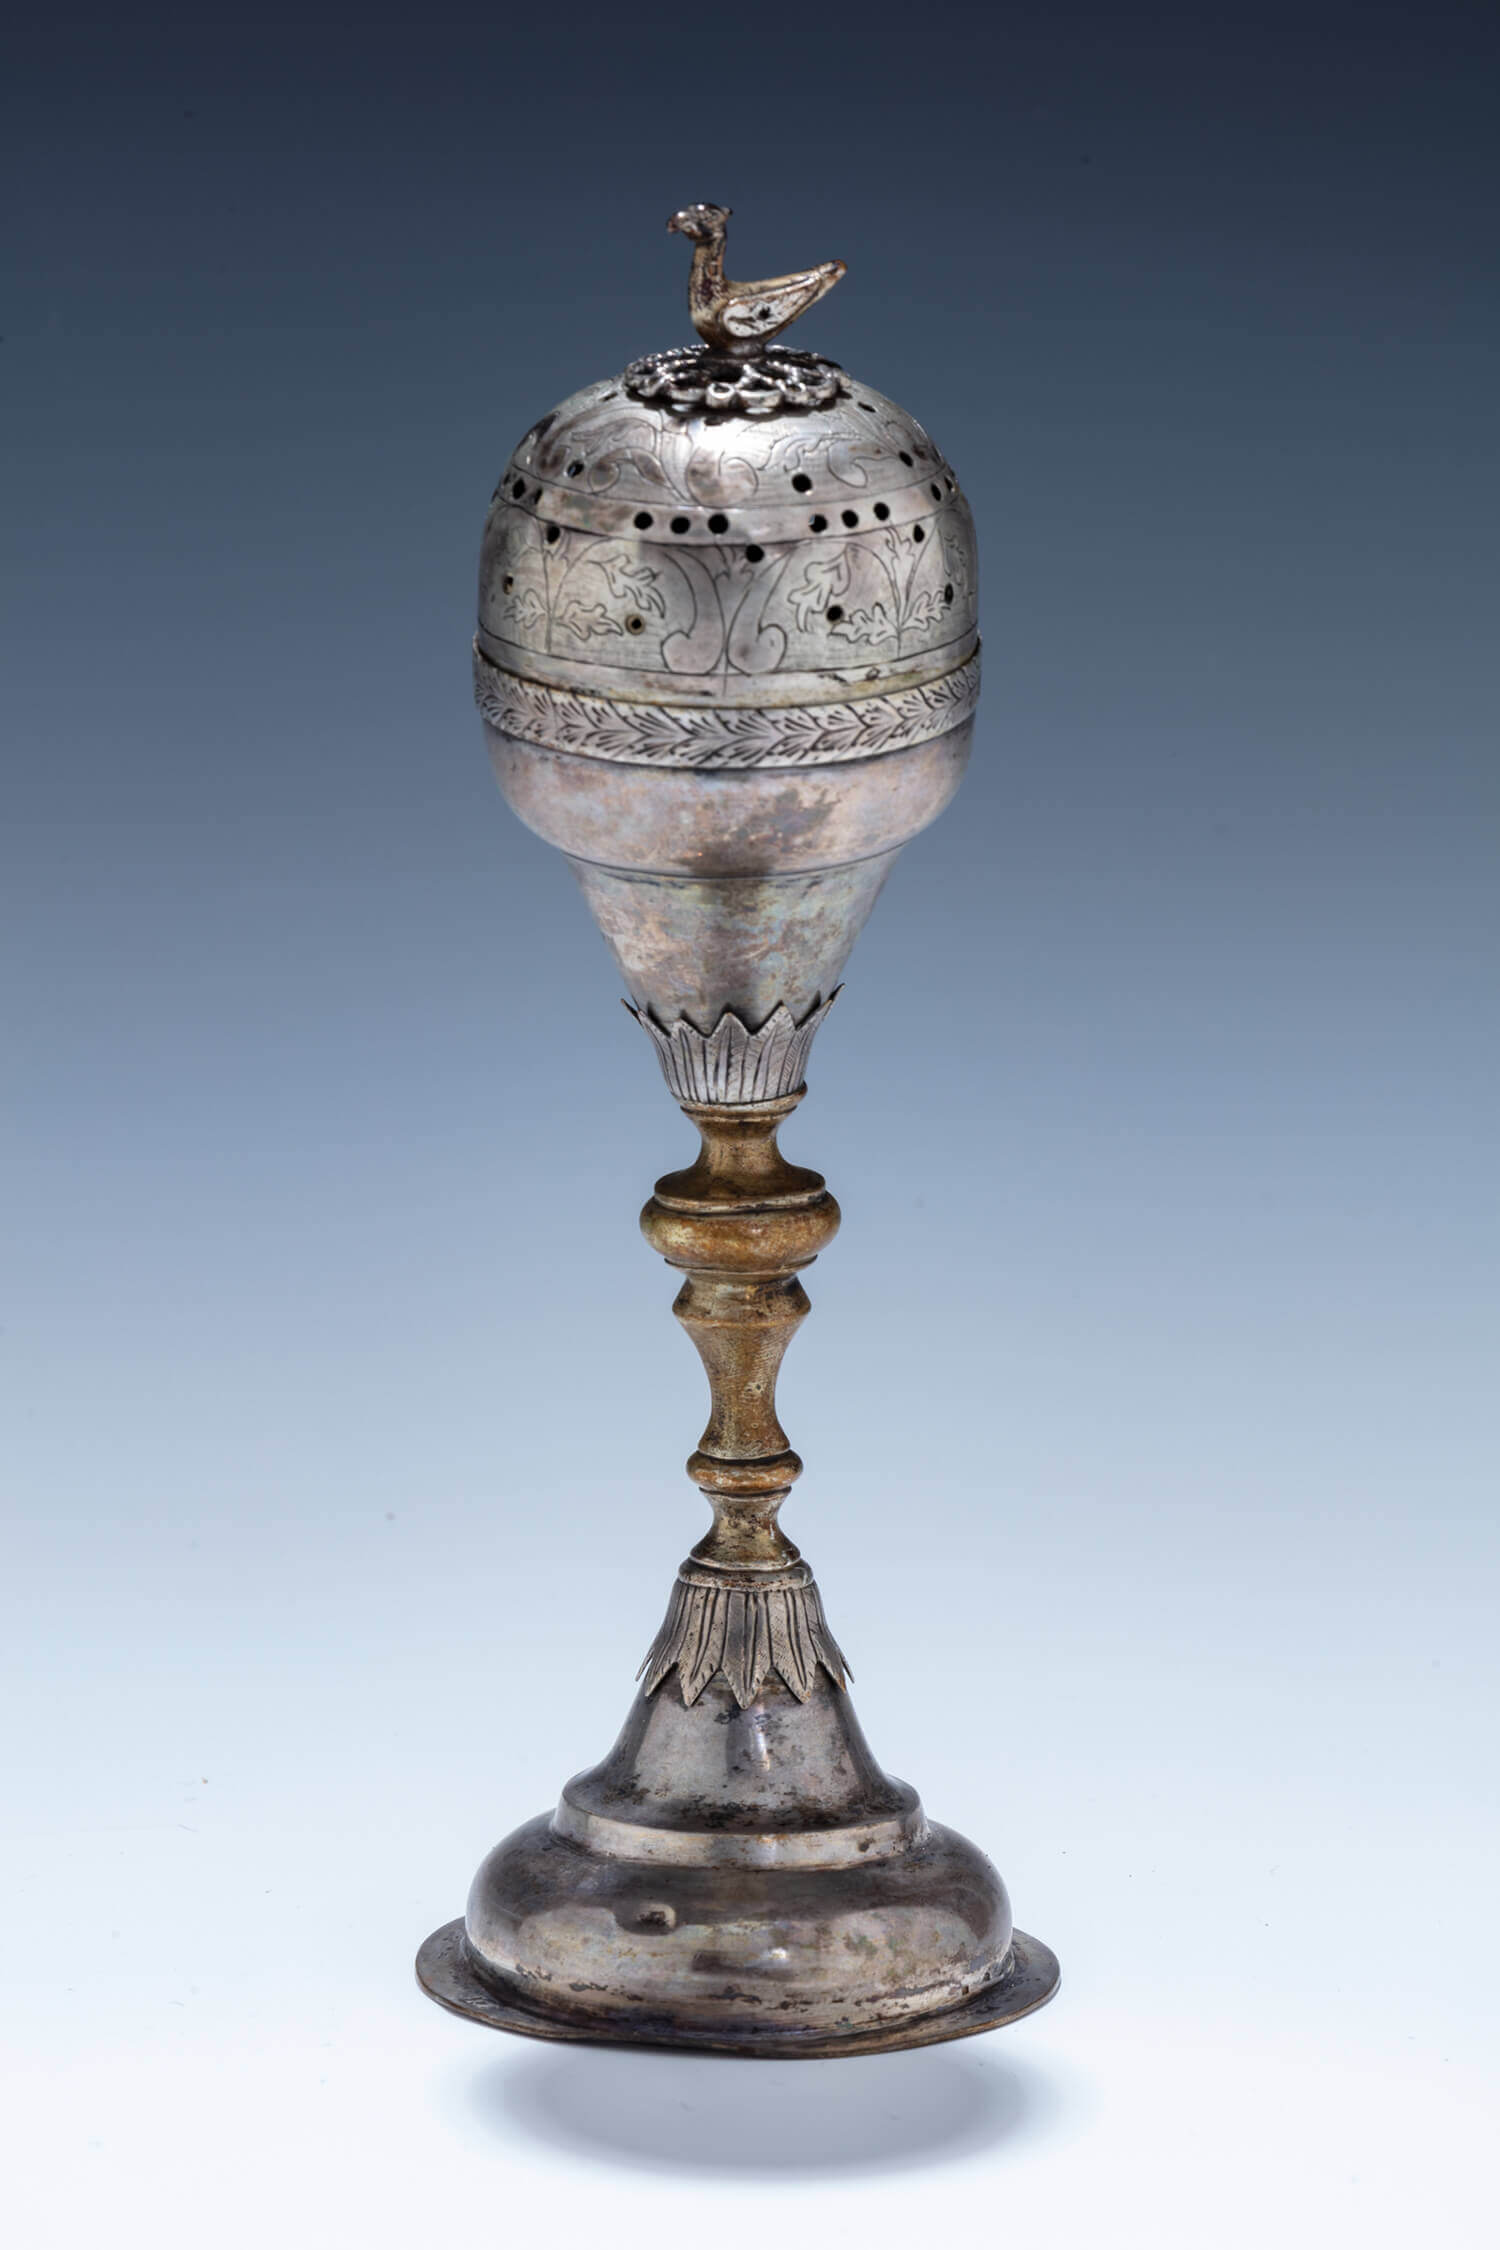 101. AN EARLY SILVER FRUIT FORM SPICE CONTAINER